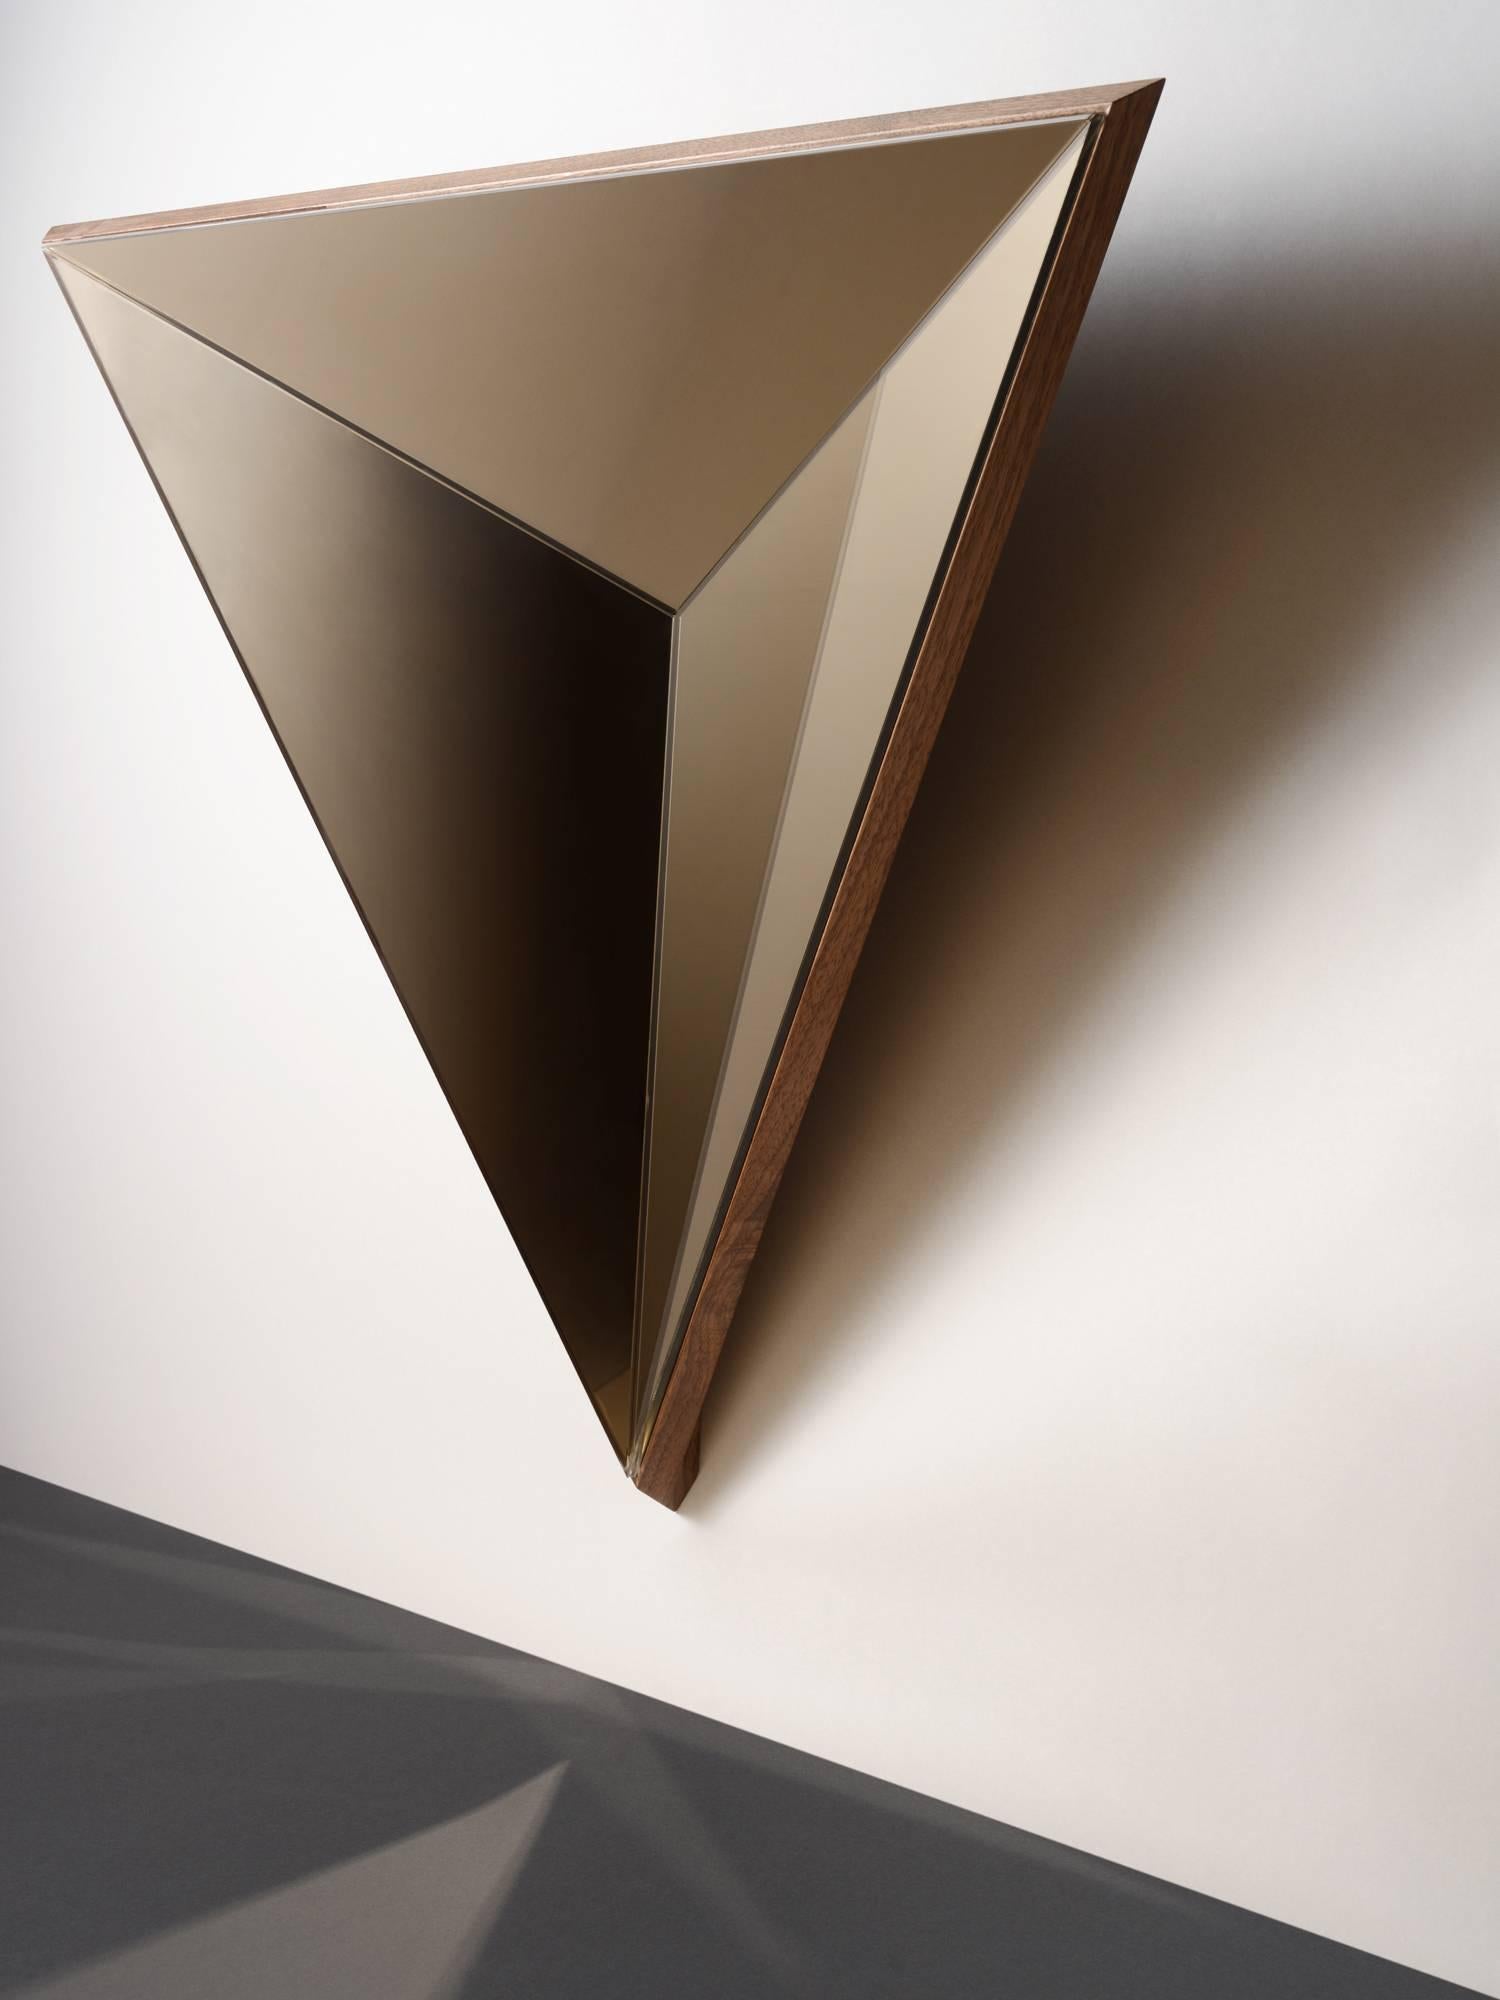 The volume mirror continues Robert Sukrachand fascination with three-dimensional, reflective surfaces. Eschewing the convention that a mirrors' primary function is for viewing ones own reflection, these graphic pieces offer the warm, atmospheric